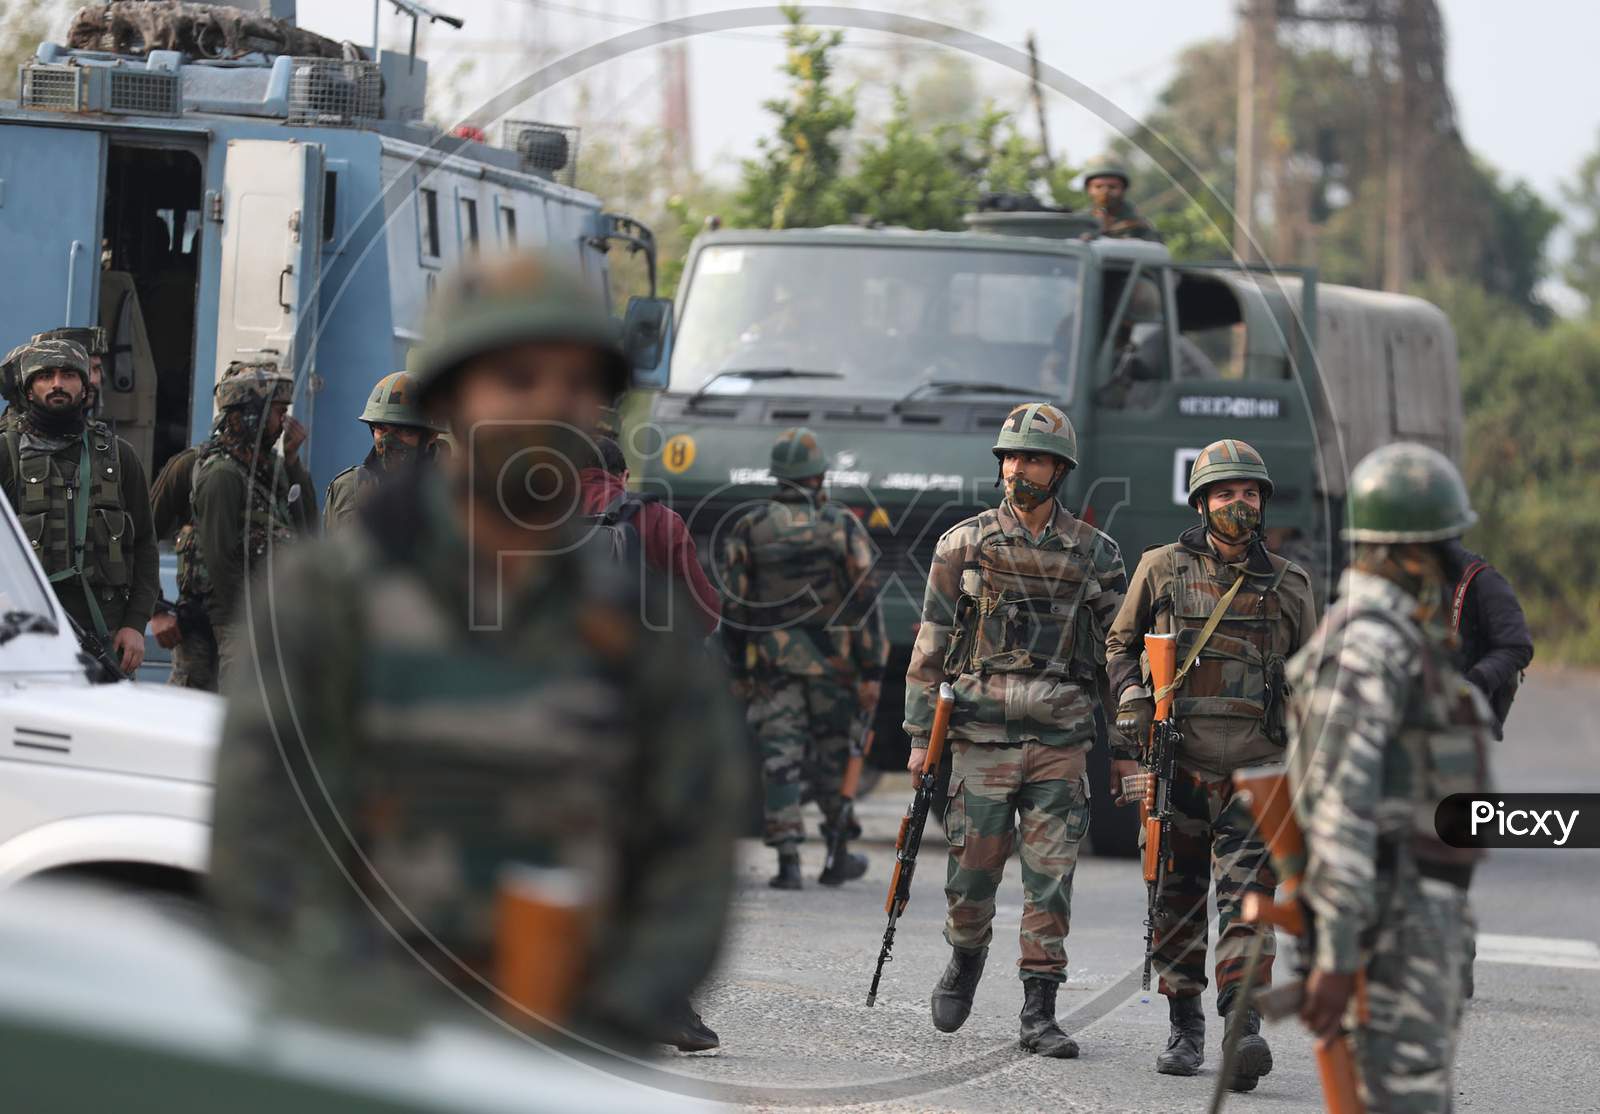 Encounter at Nagrota Ban toll plaza, A gunfight broke out between terrorists and security forces in the Nagrota area of Jammu and Kashmir’s Jammu district early on Thursday. Four militants have been killed. November 29,2020.